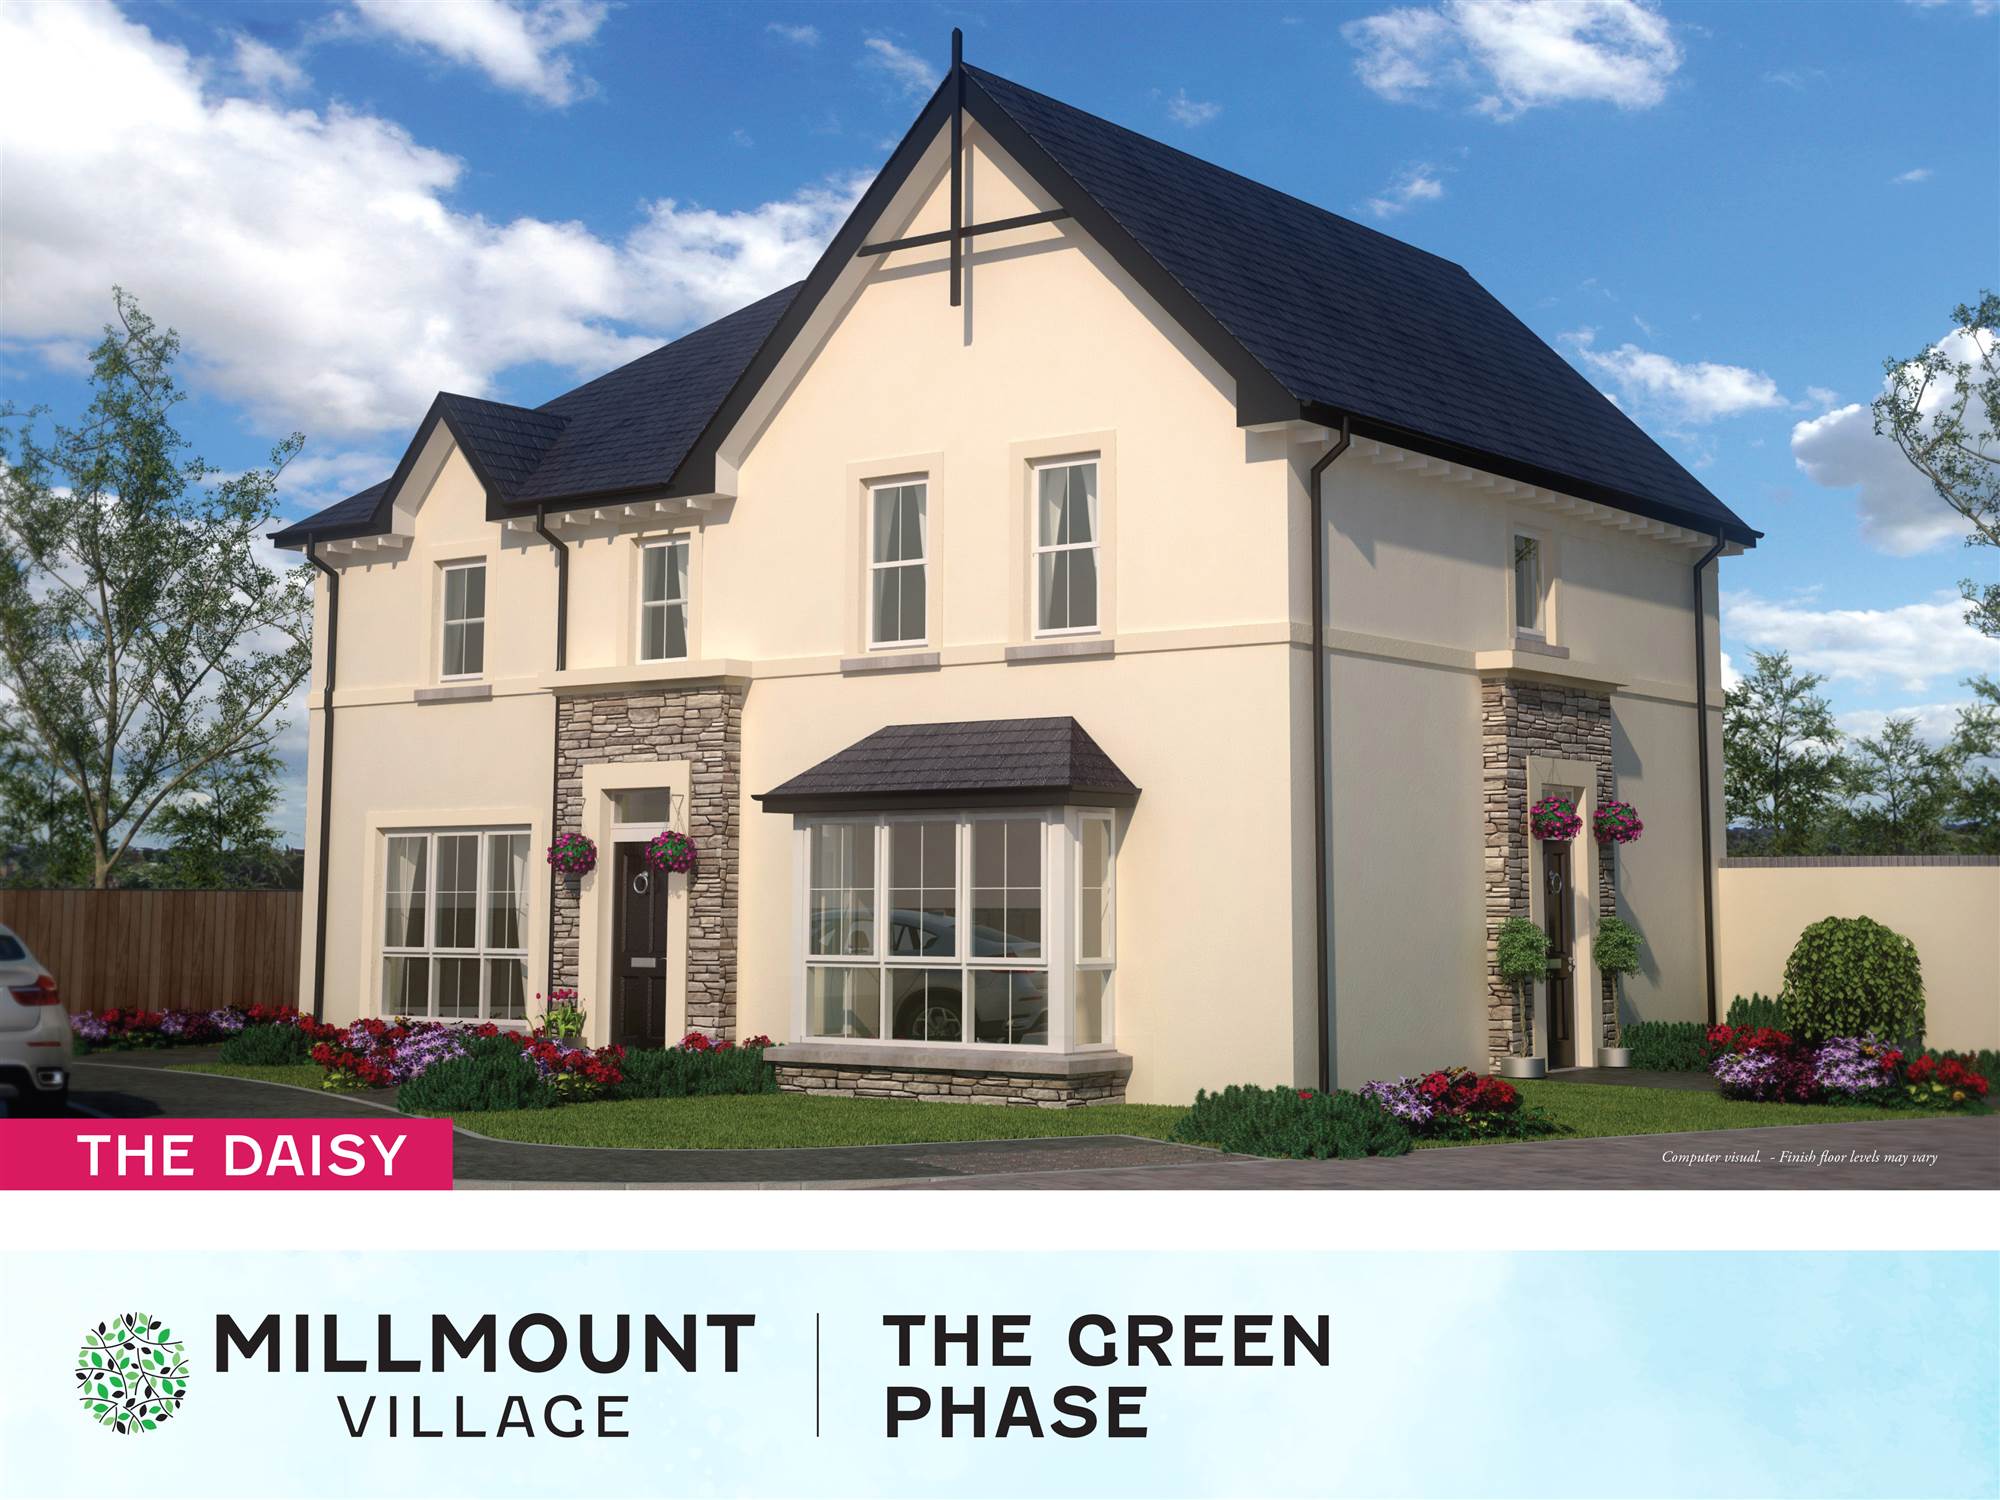 517 The Green at Millmount Village